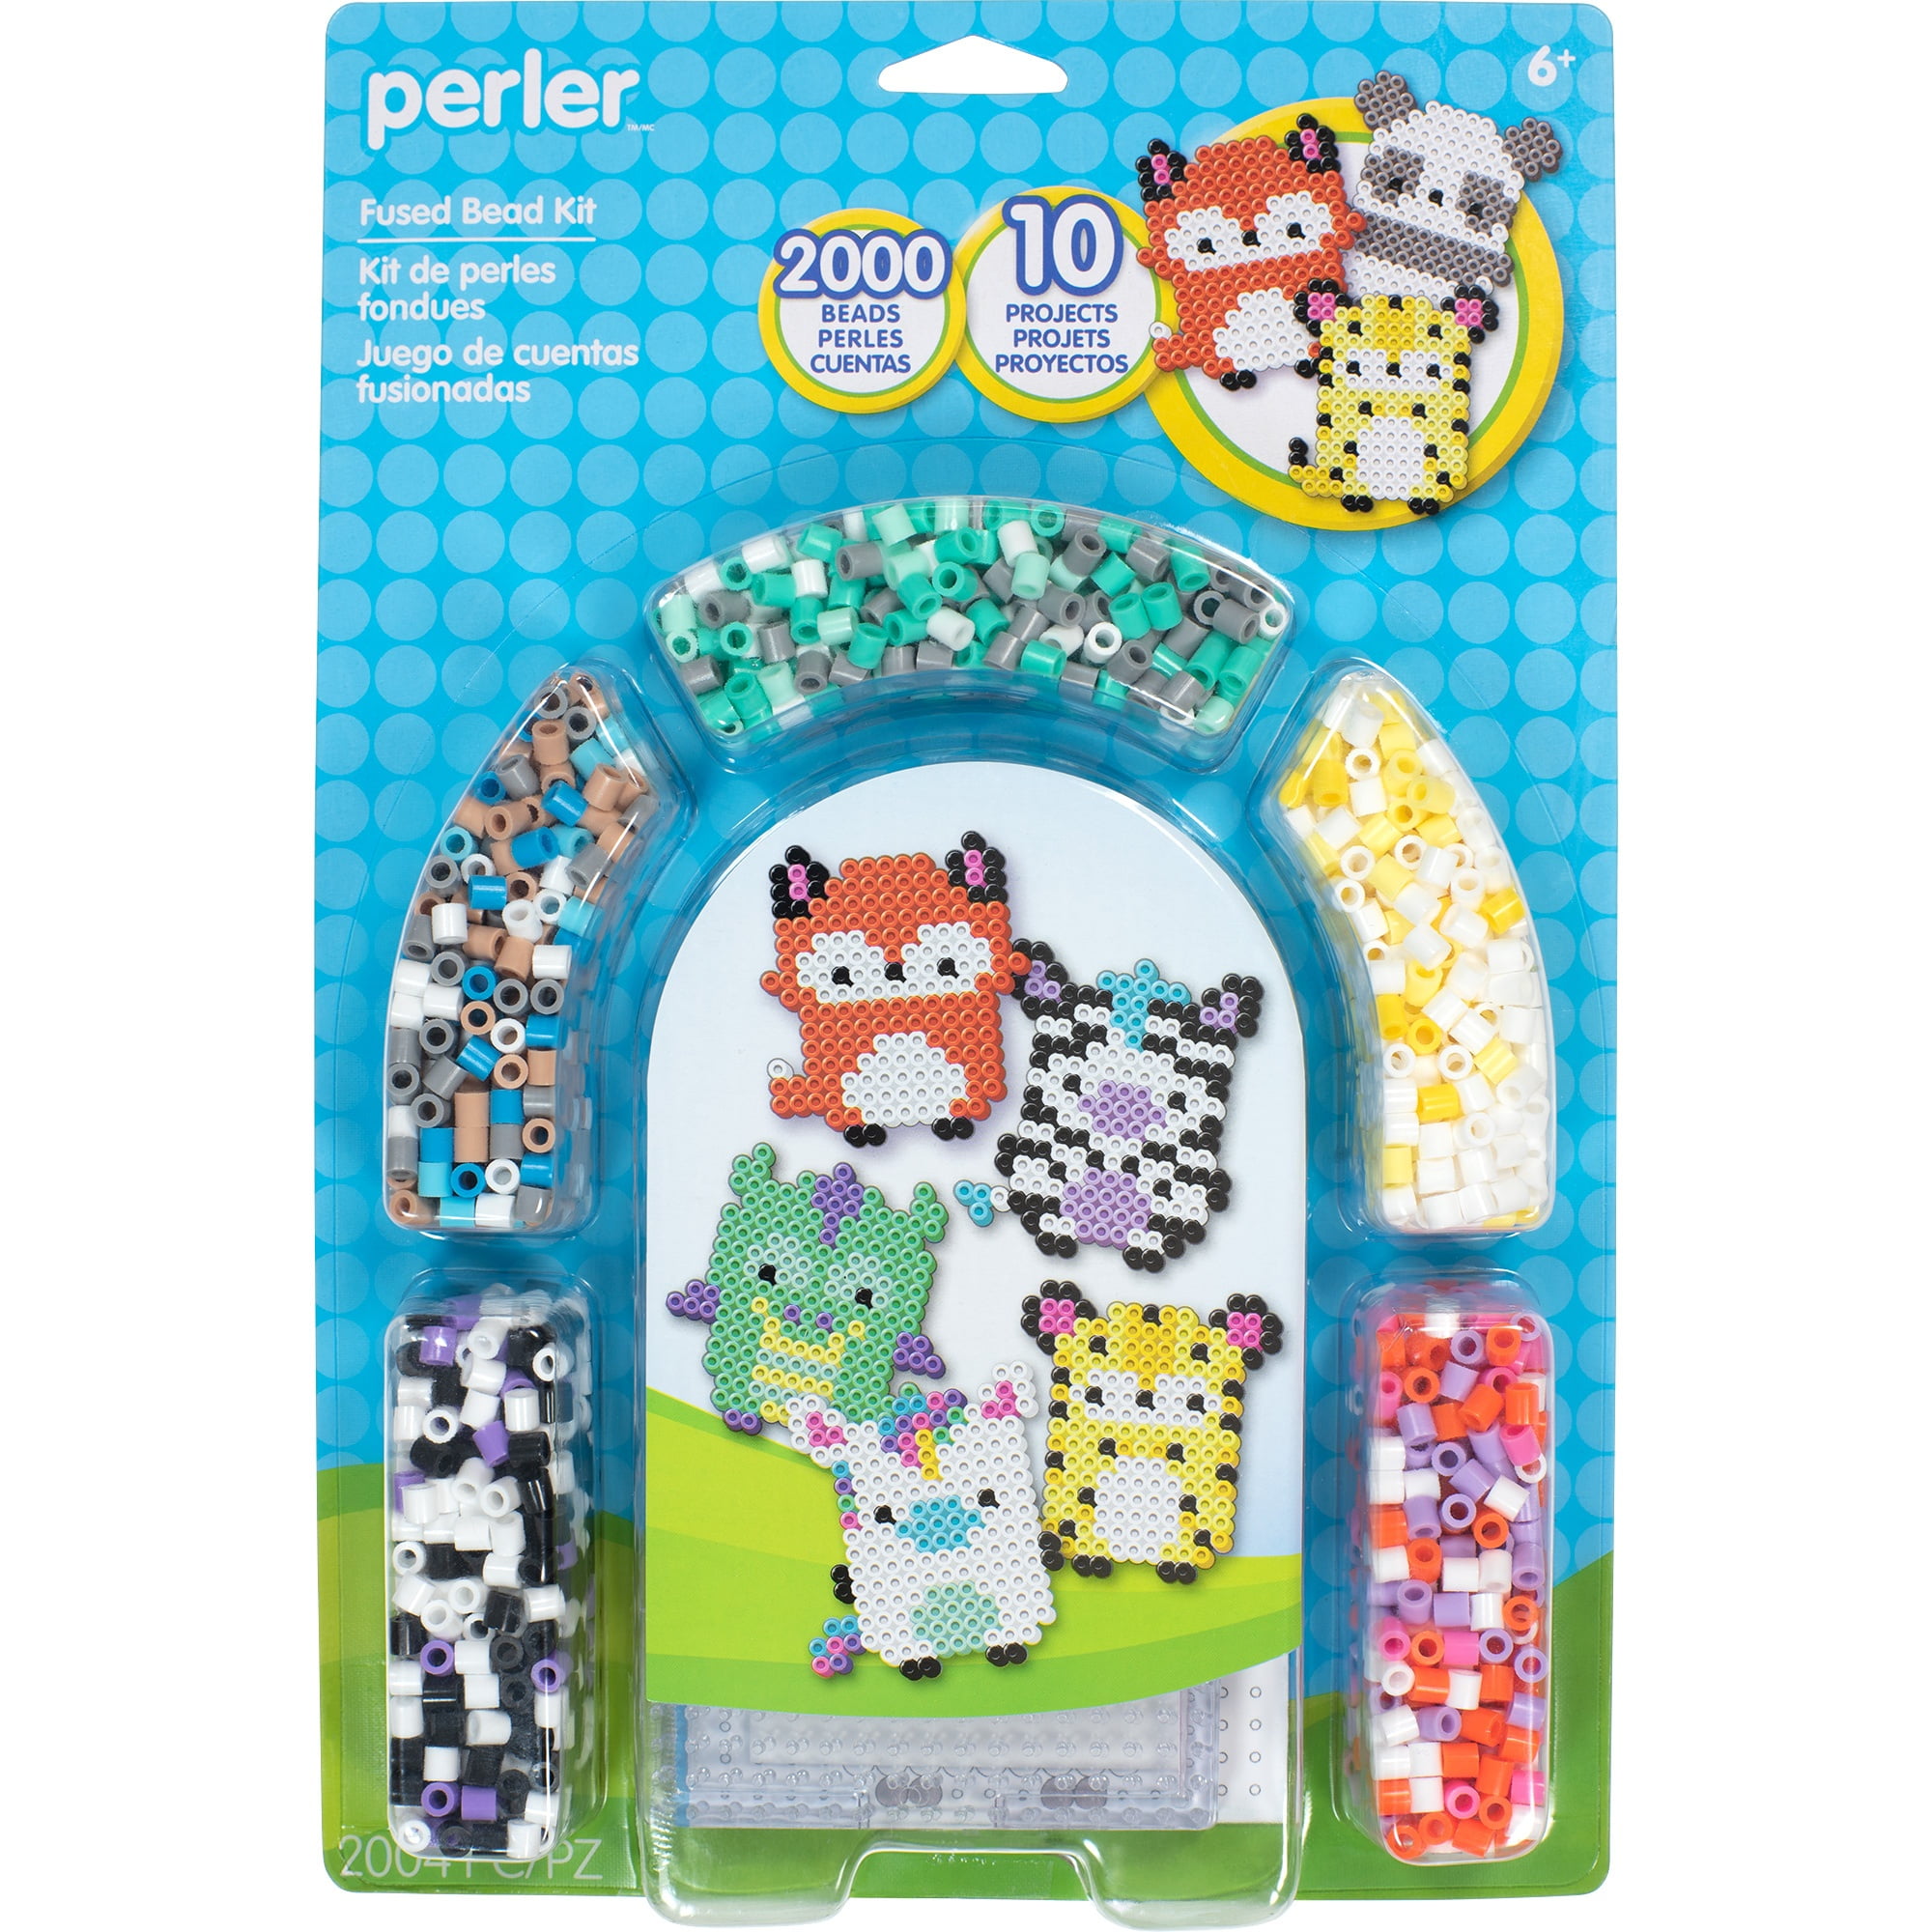  Perler Pet Parade Deluxe Fuse Bead Craft Activity Kit, 5020 pcs  & Beads Bulk Assorted Multicolor Fuse Beads for Kids Crafts, 22000 pcs :  Arts, Crafts & Sewing